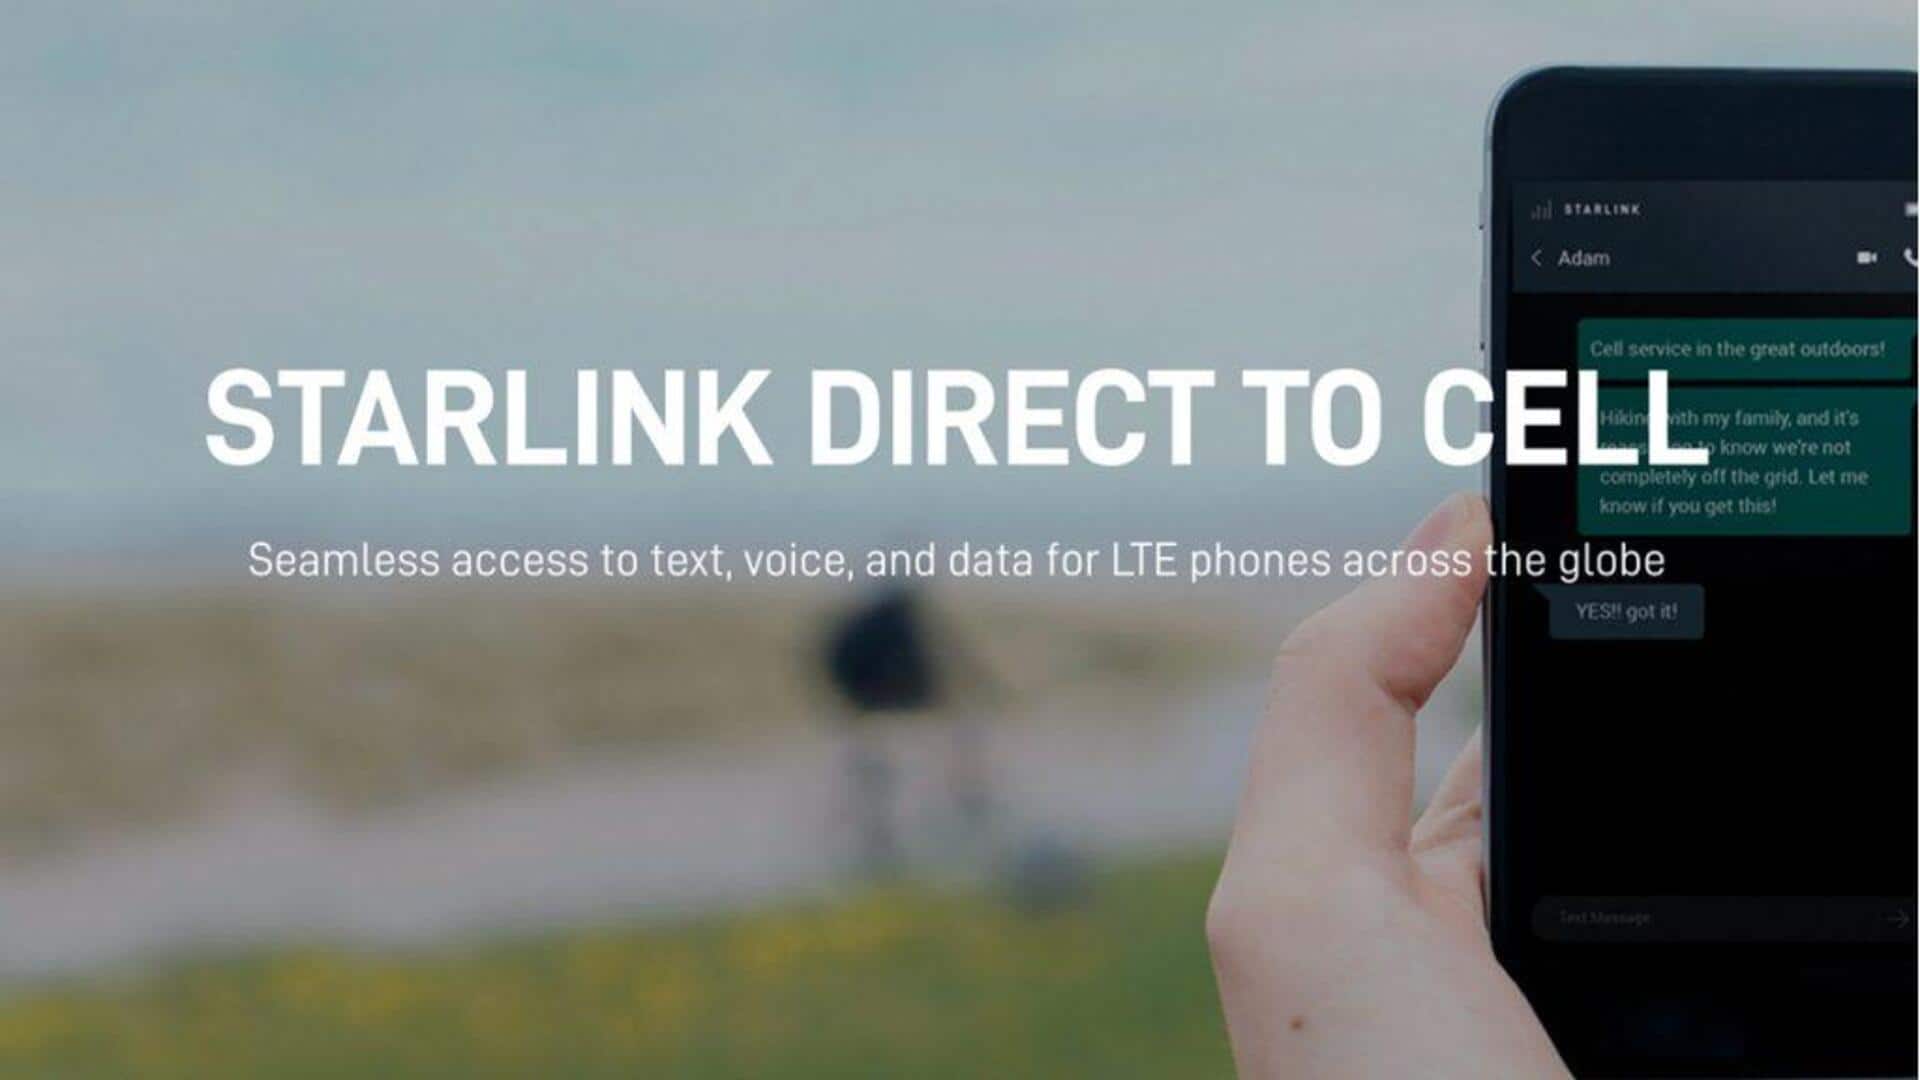 How Starlink's 'Direct-to-Cell' satellite connectivity service for smartphones works